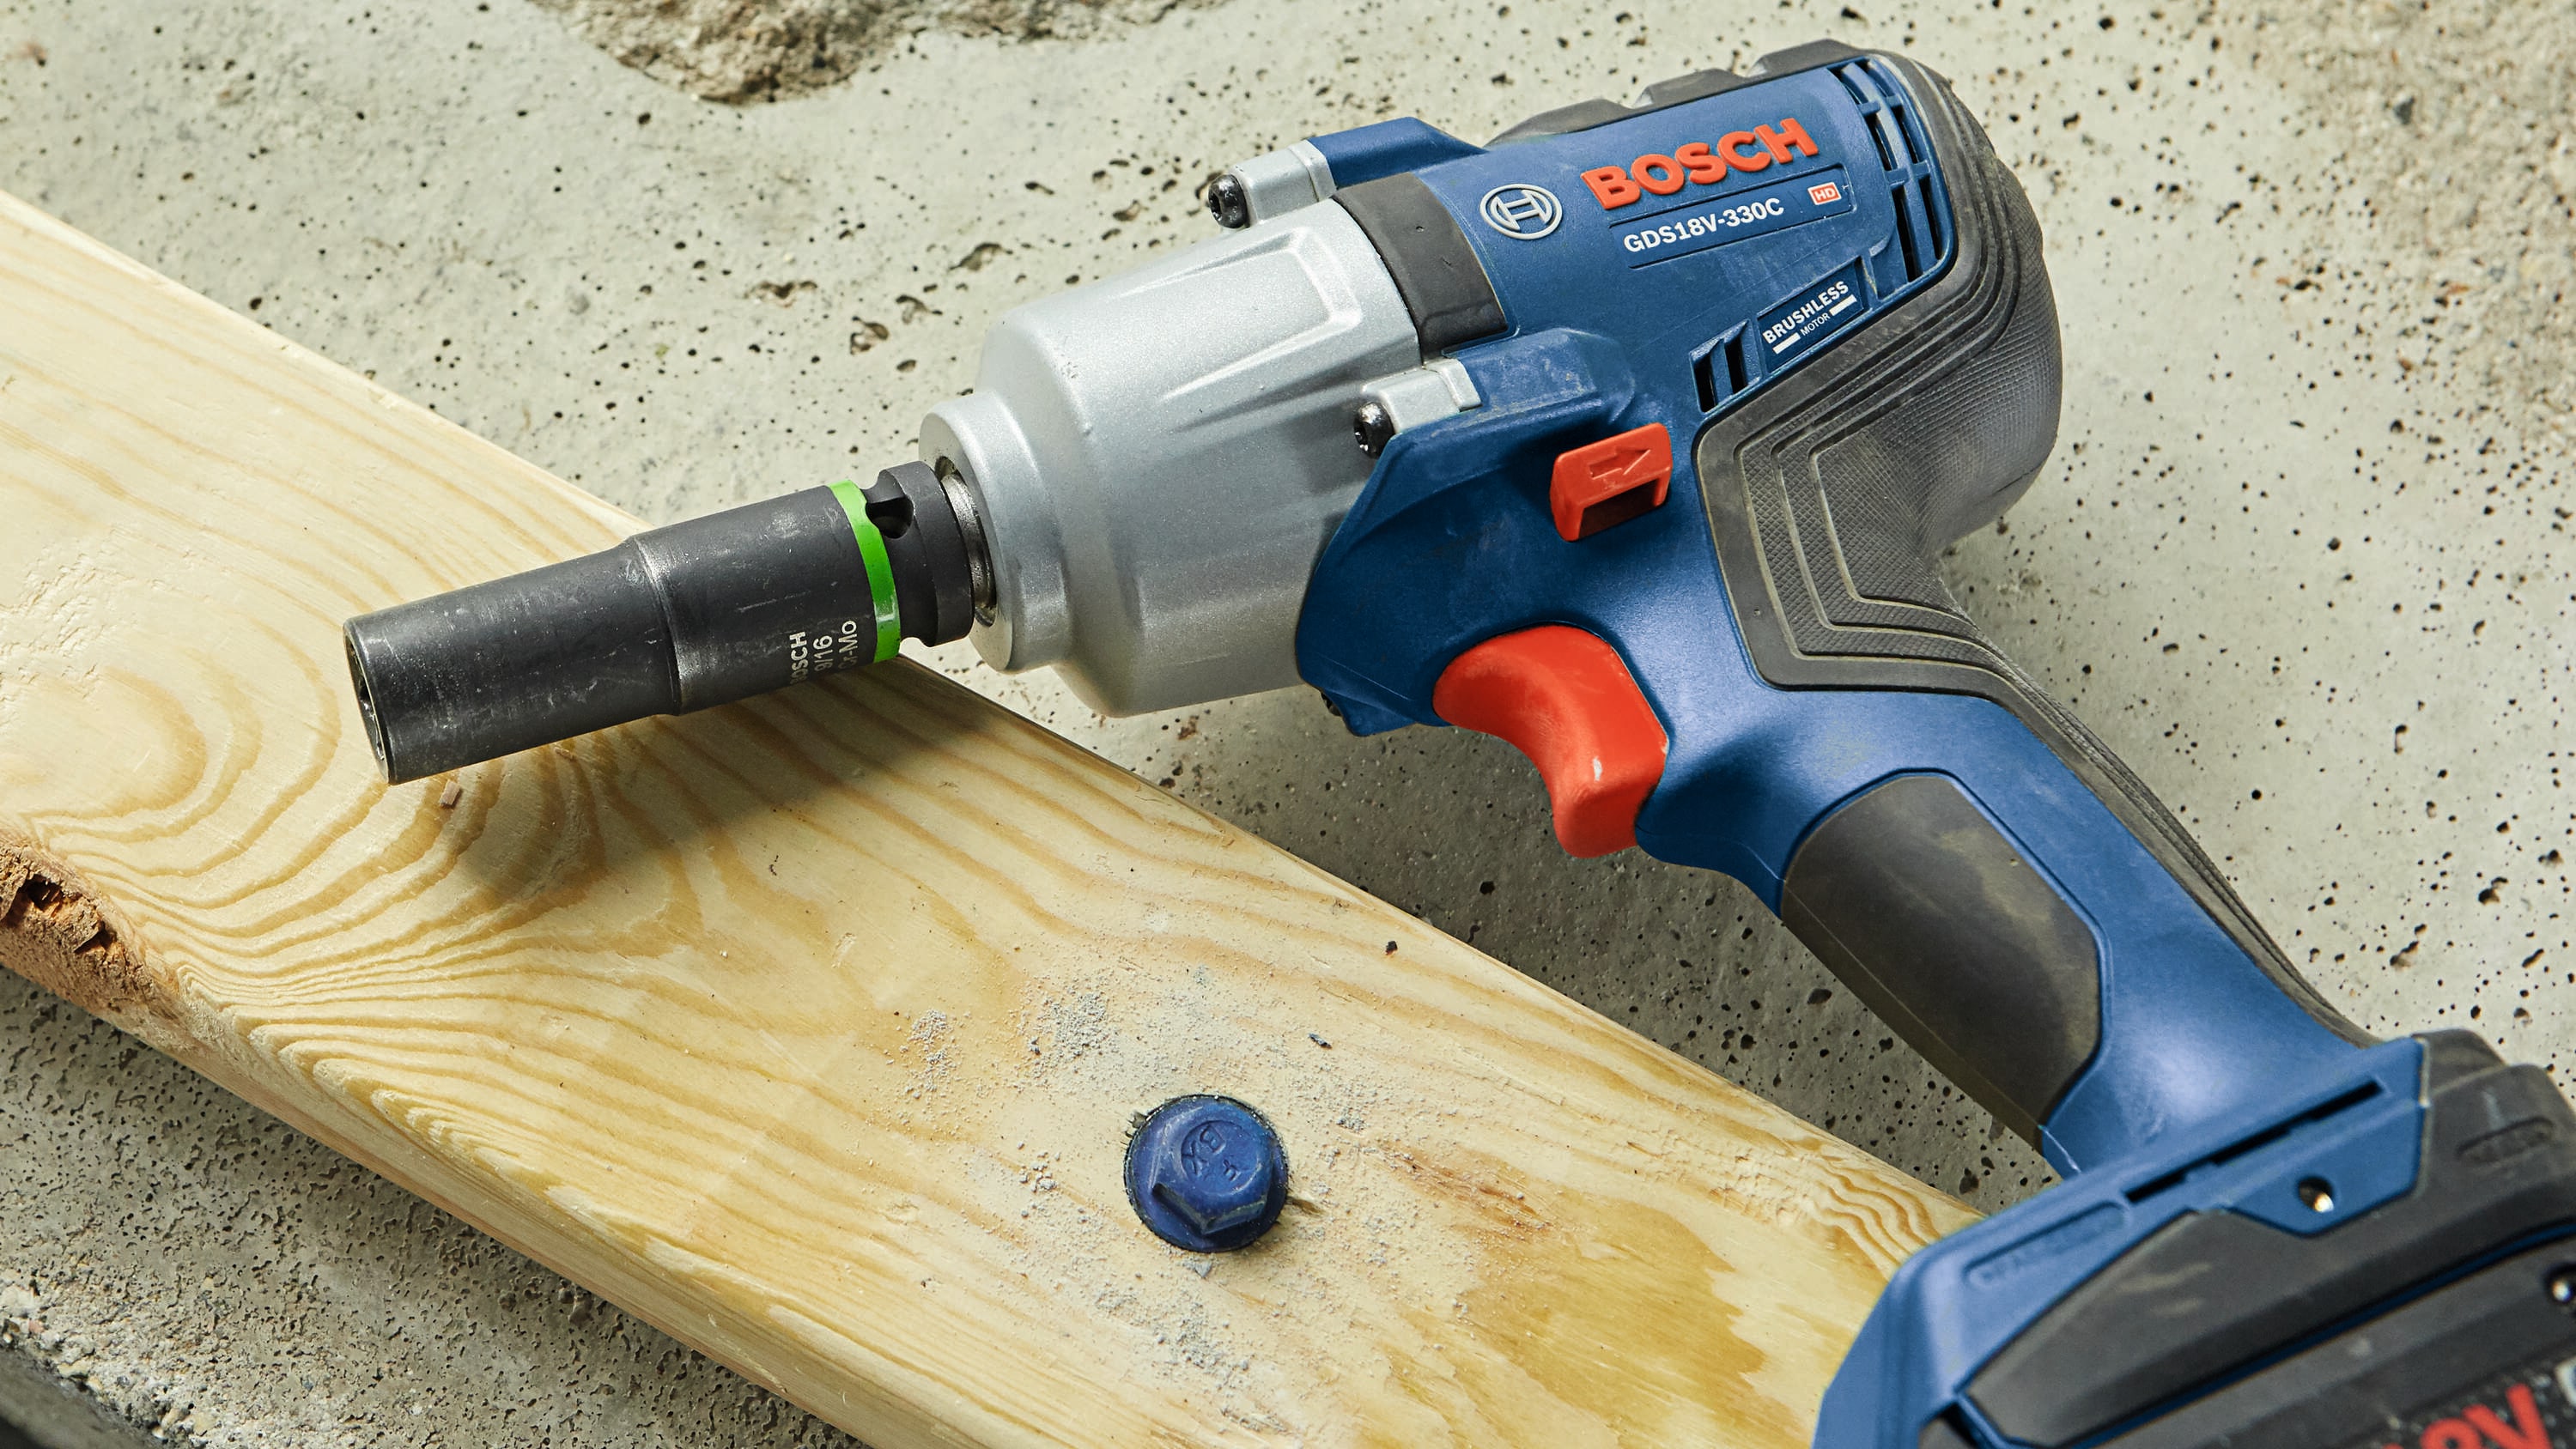 Bosch Professional Power Tools and Accessories - Last call to test out the  new GDX 18V-210 C Impact Driver/Wrench! With its 2-in-1 tool holder: 1/4”  internal hex and 1/2” square drive it